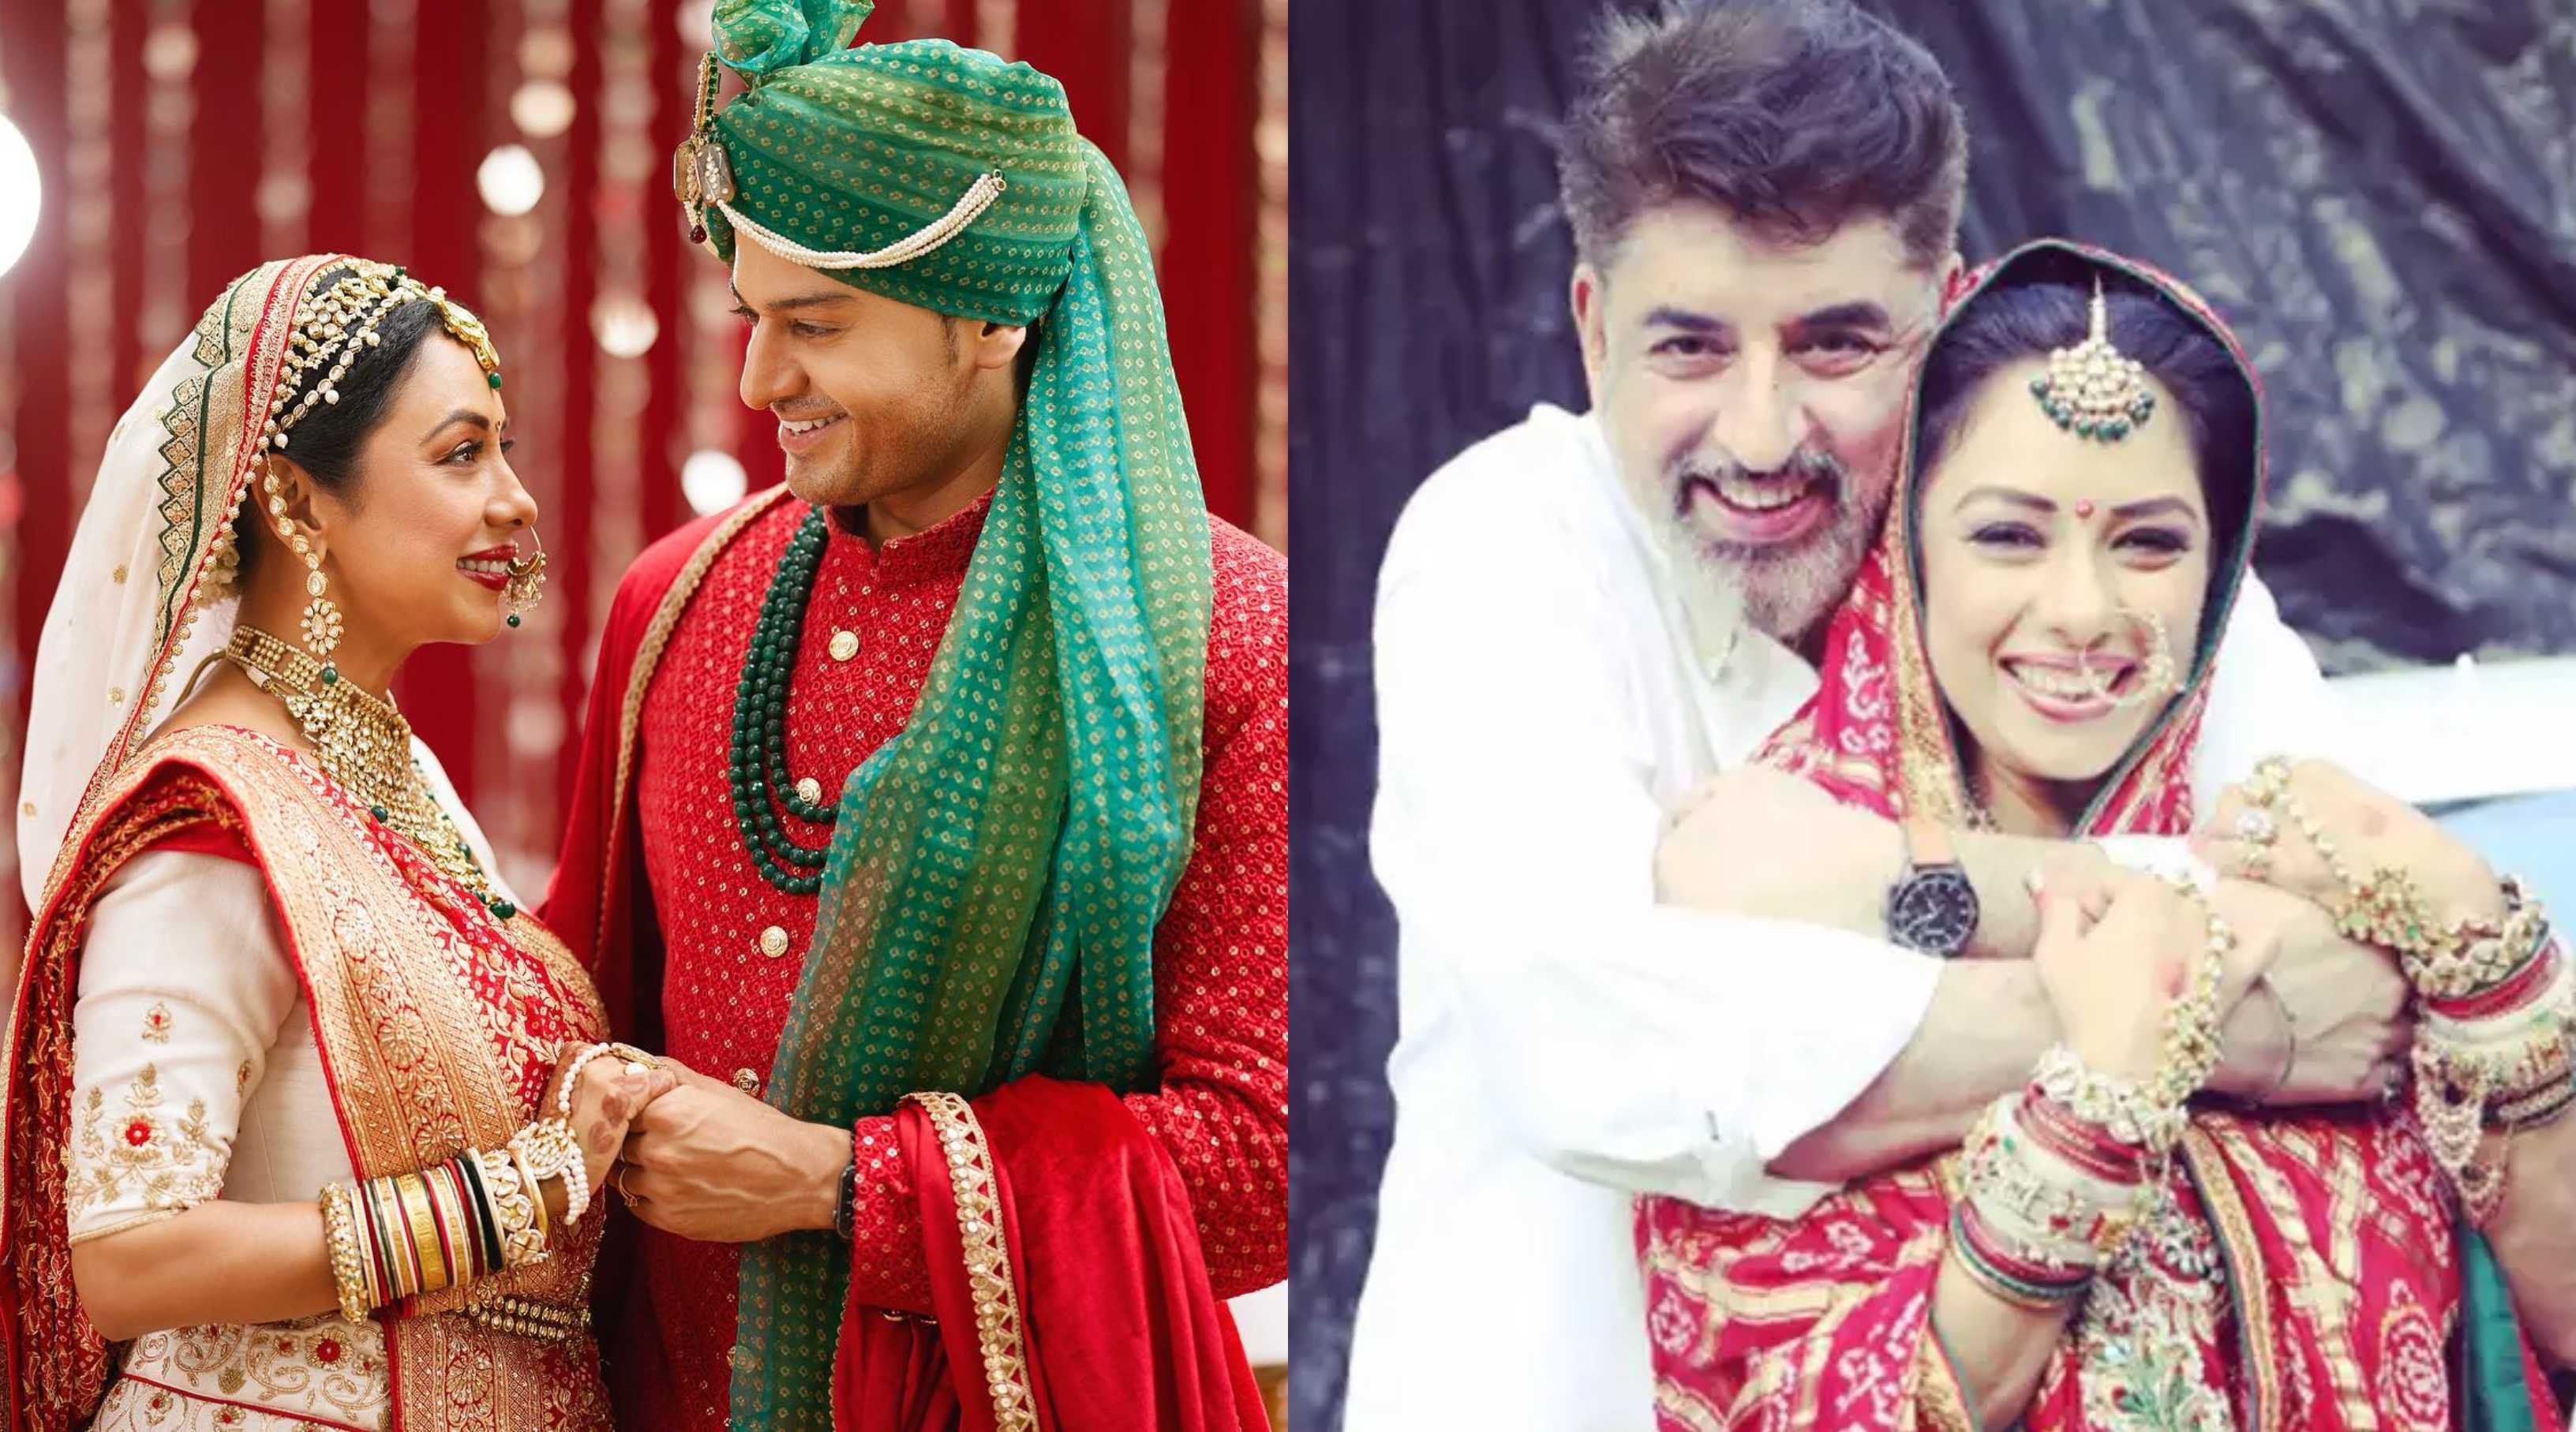 Anupamaa: Rupali Ganguly recalls her real wedding being ‘hilarious and super quick’ amidst her reel wedding